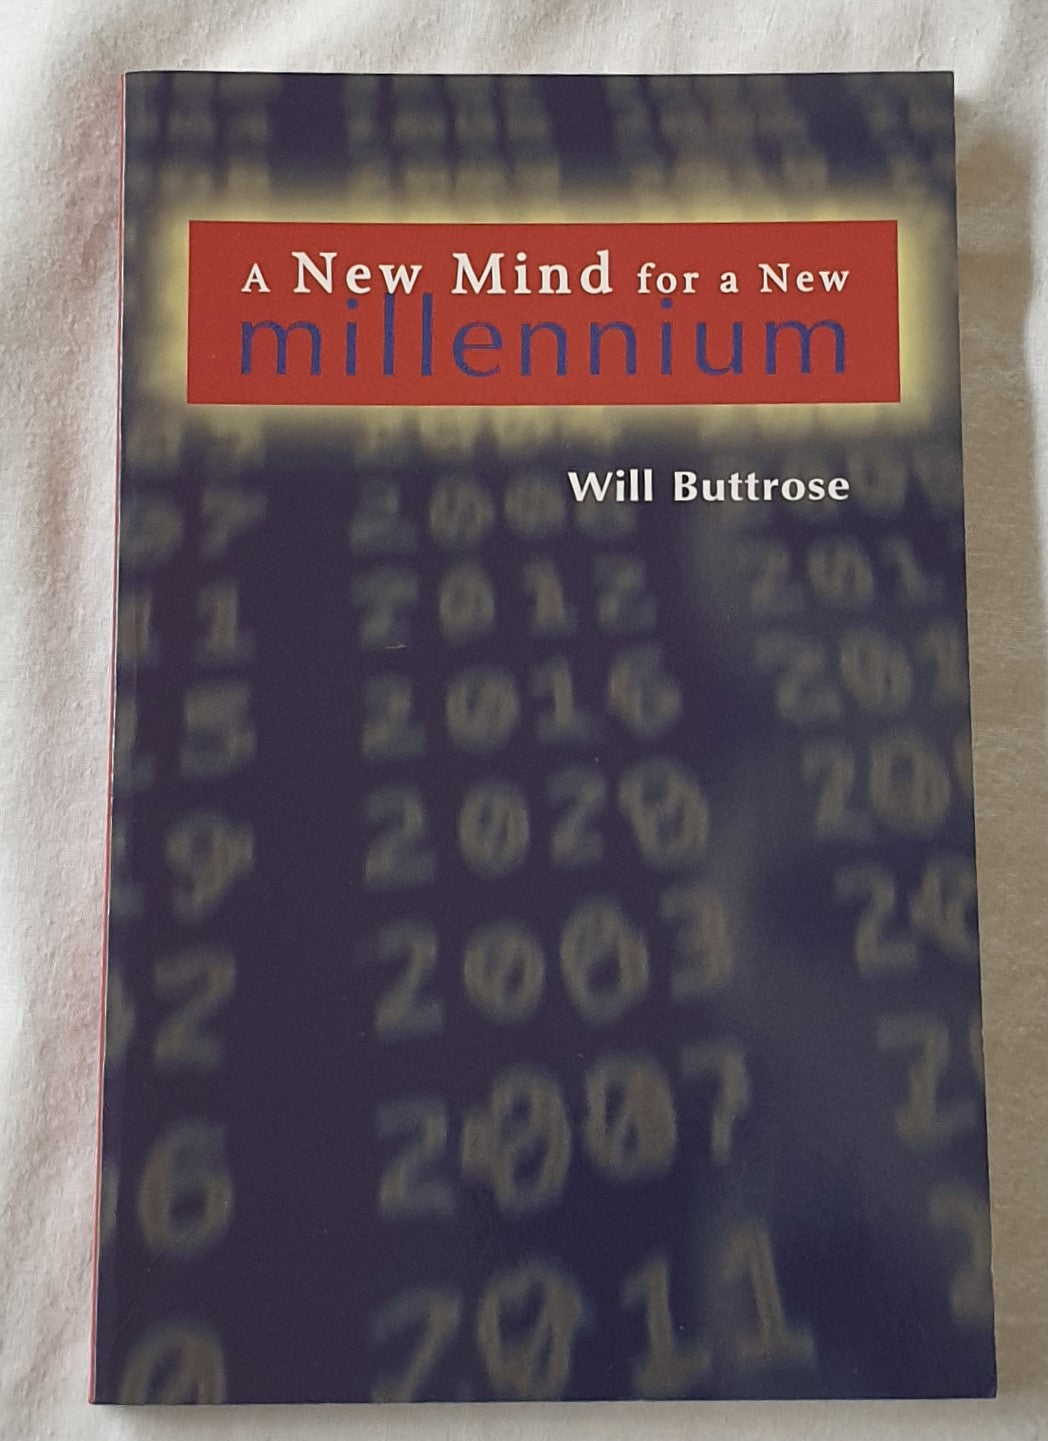 A New mind for a New Millennium by Will Buttrose